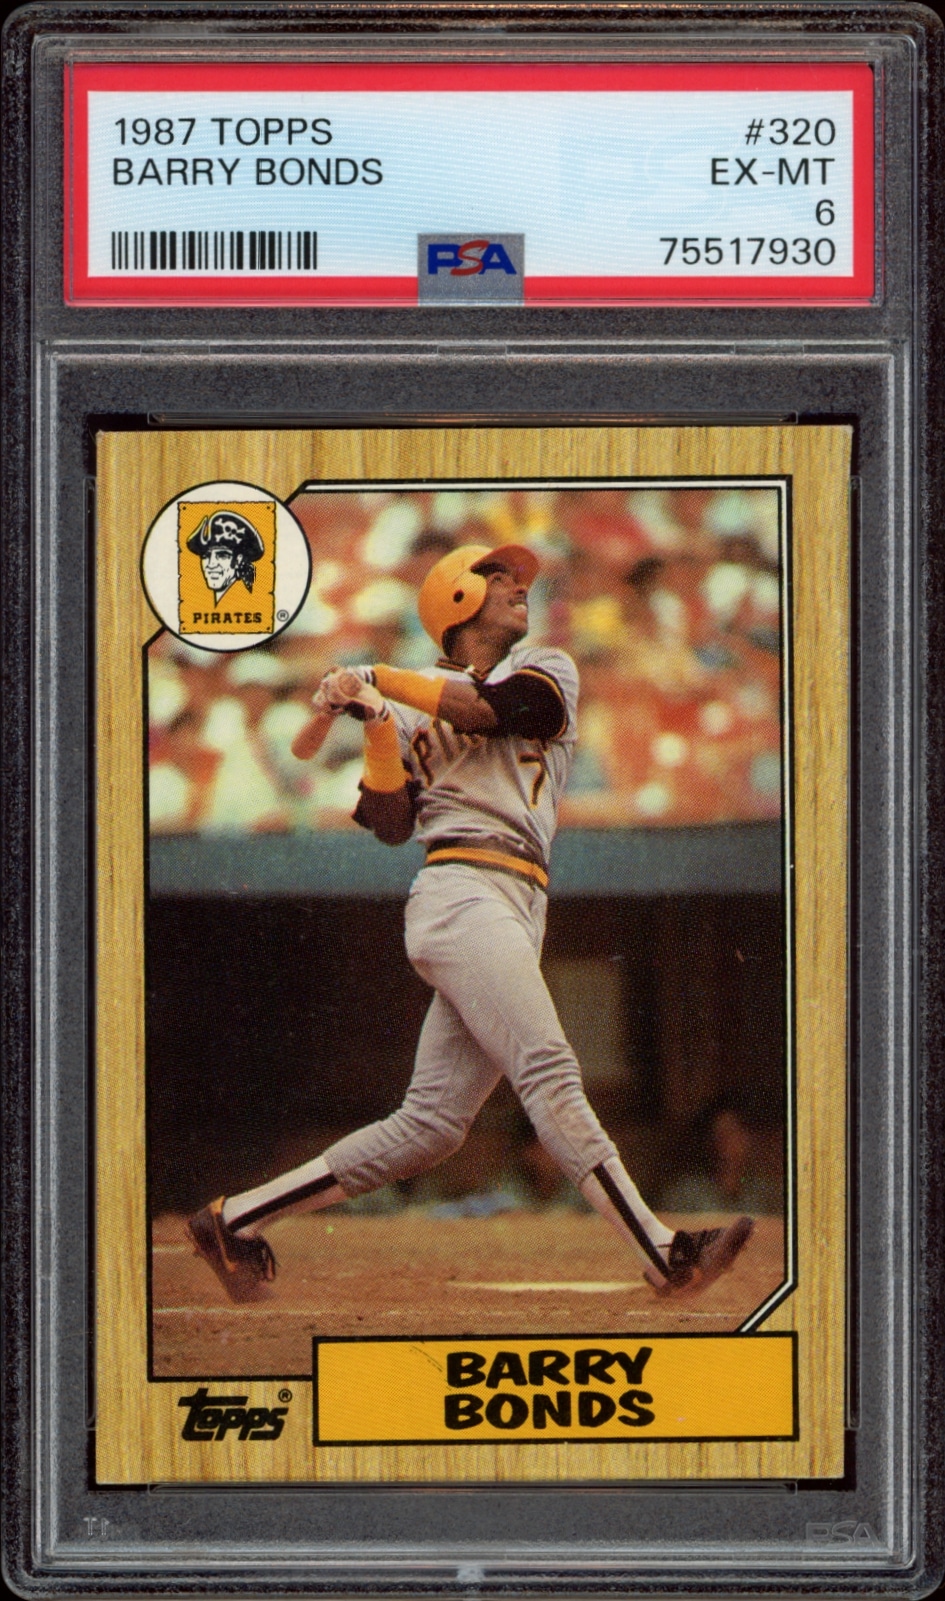 Barry Bonds 1987 Topps Baseball Card #320, Graded PSA 6, in Mint Condition.